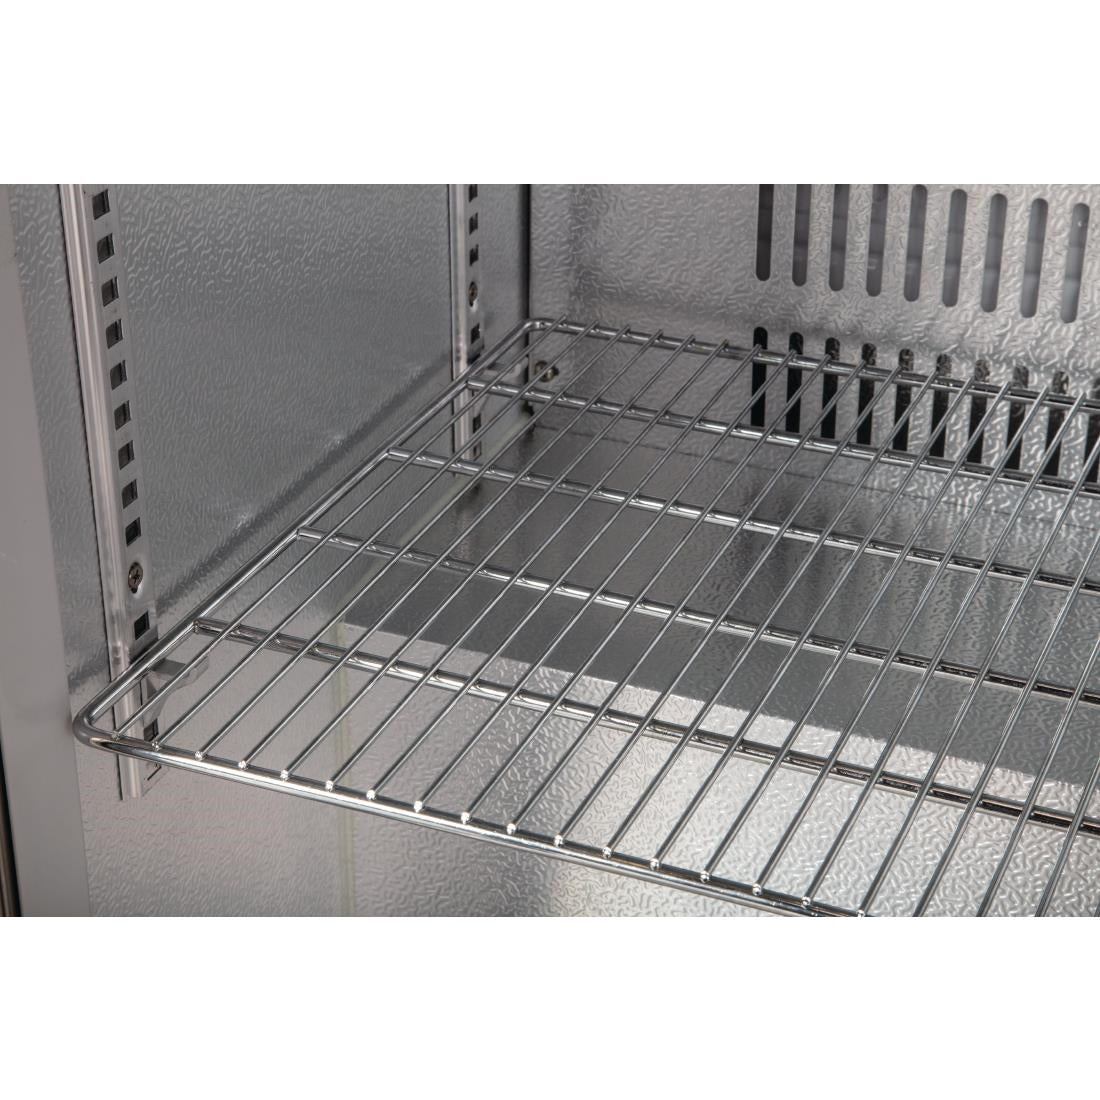 GL008 Polar G-Series Back Bar Cooler with Hinged Doors Stainless Steel 208Ltr